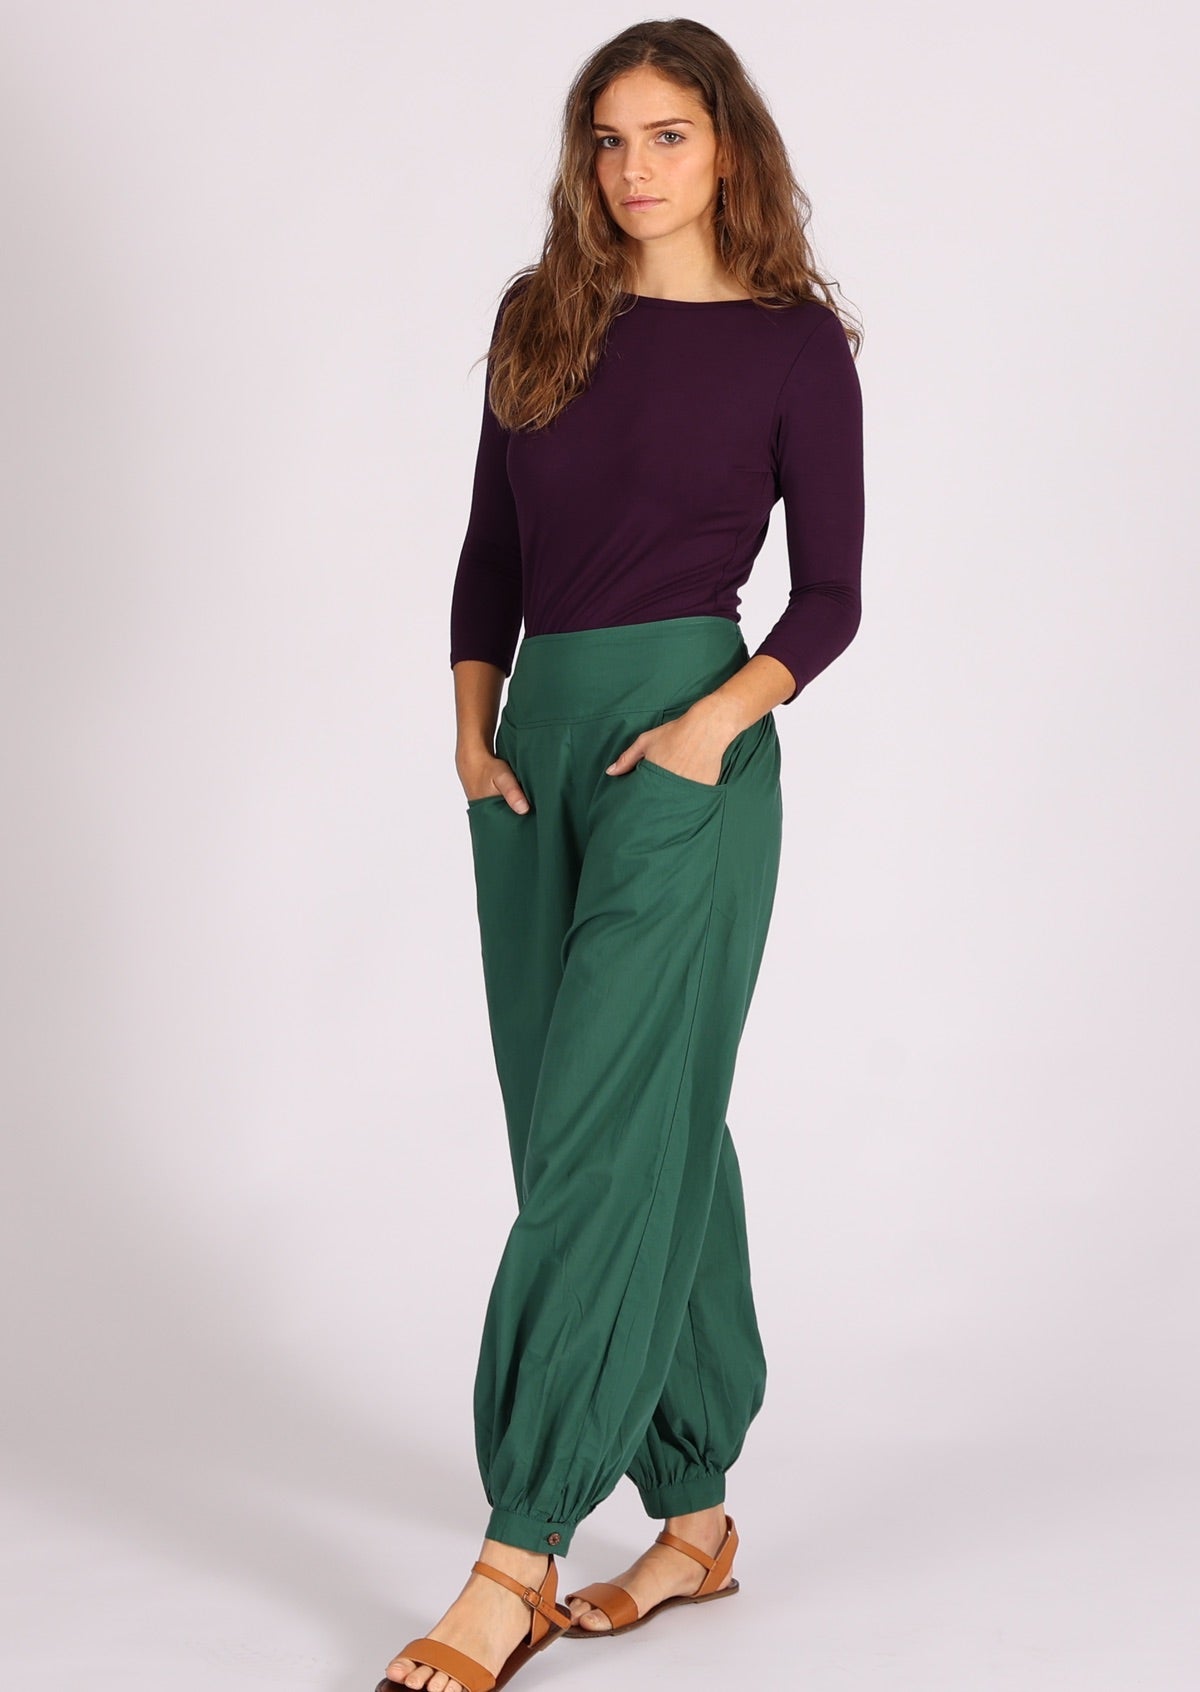 Dark green cotton loose leg cotton pants with cuffed ankle